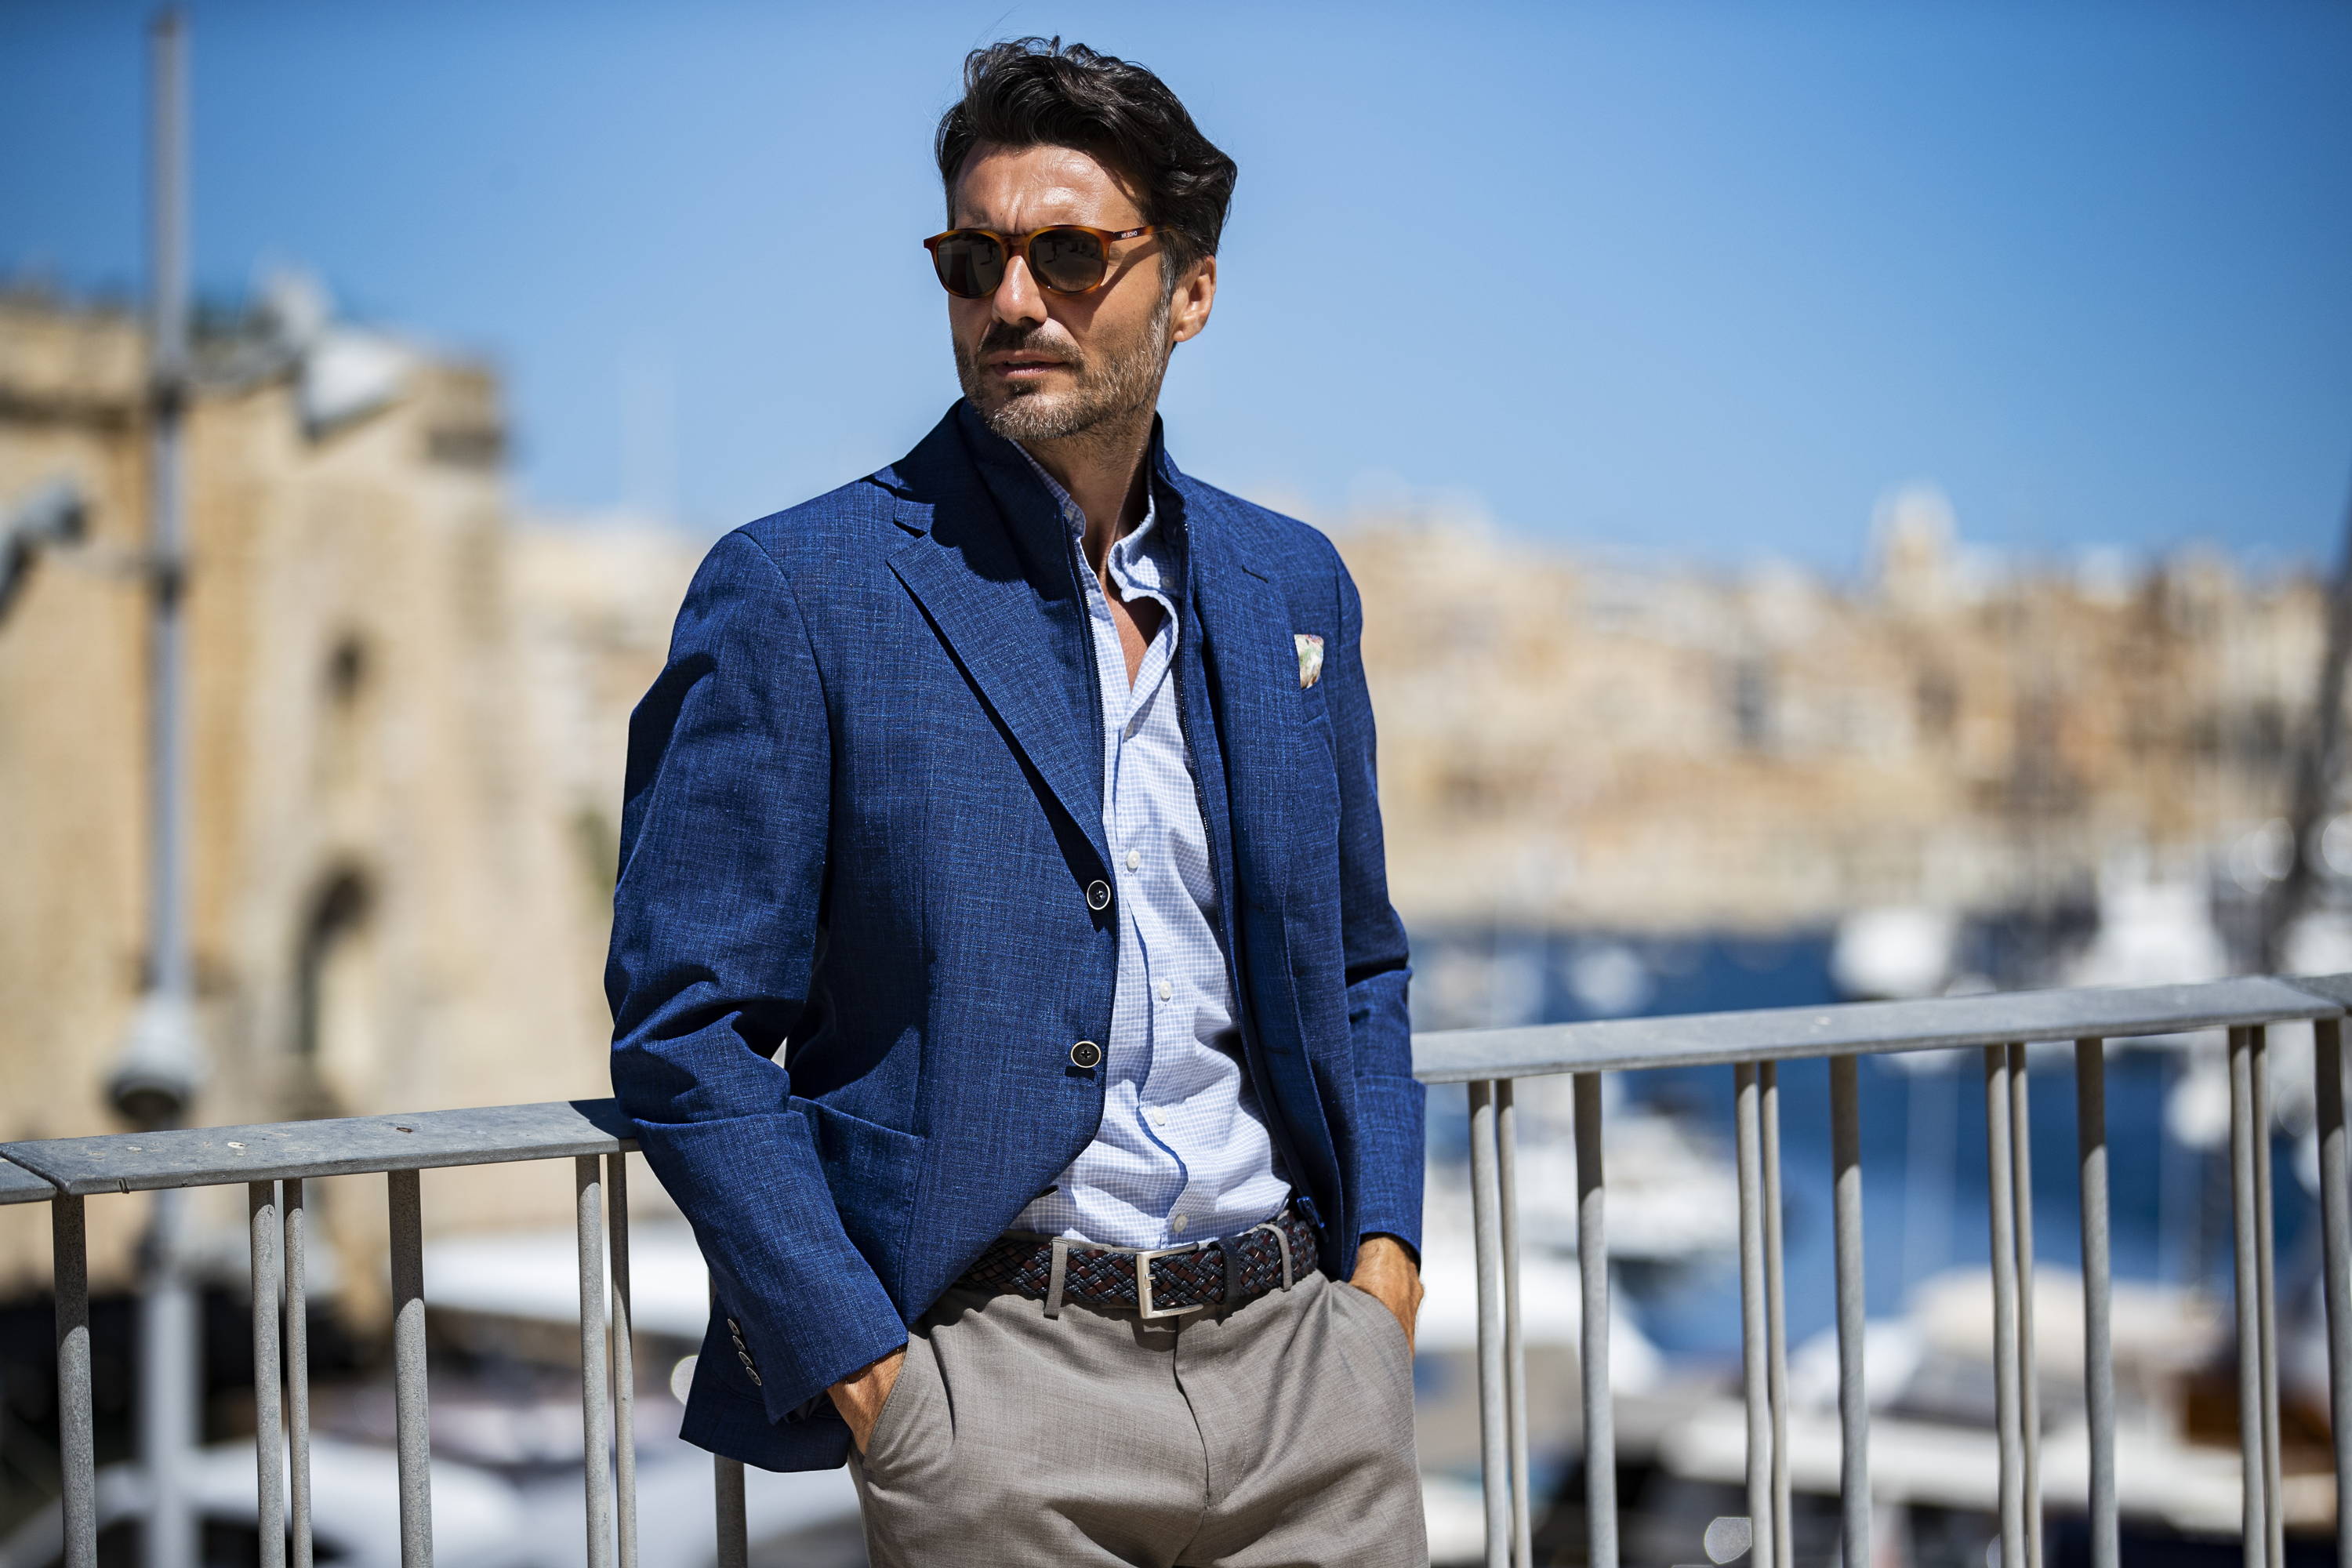 How To Style Your Blue Shoes - Part 1: Suits - The Shoe Snob Blog